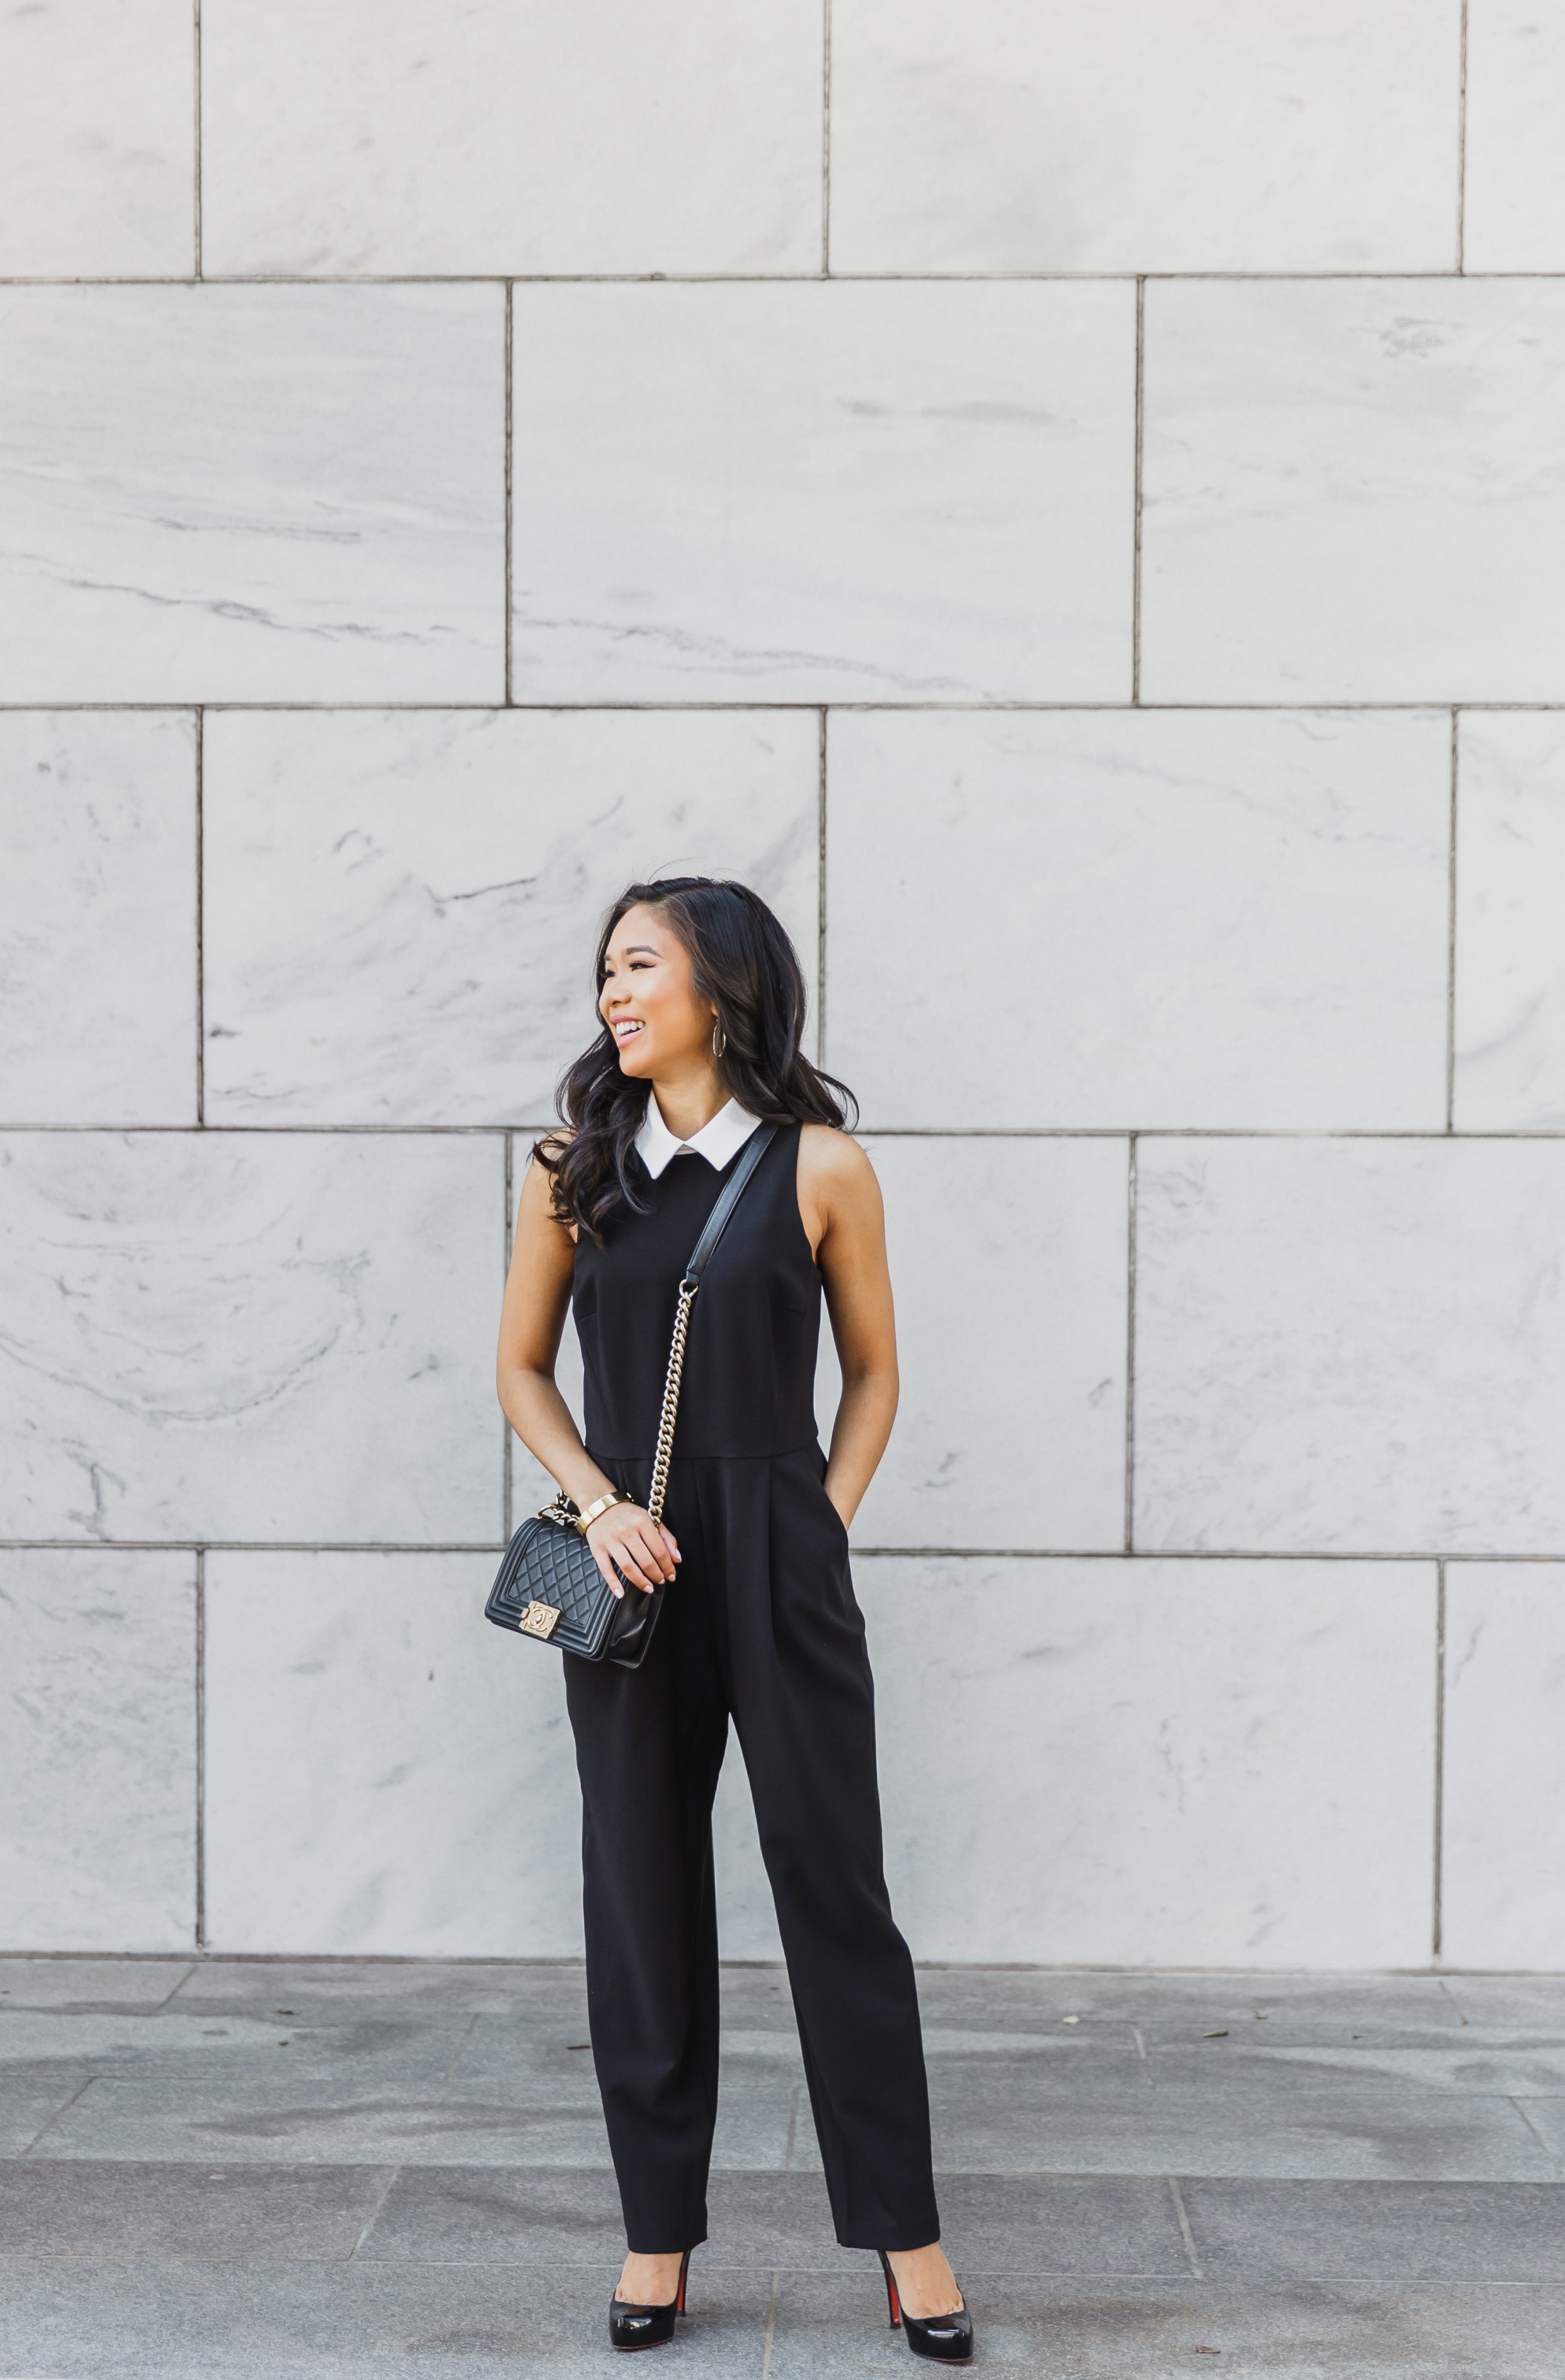 COLOR & CHIC | What I Wear to Work - Black and White Jumpsuit